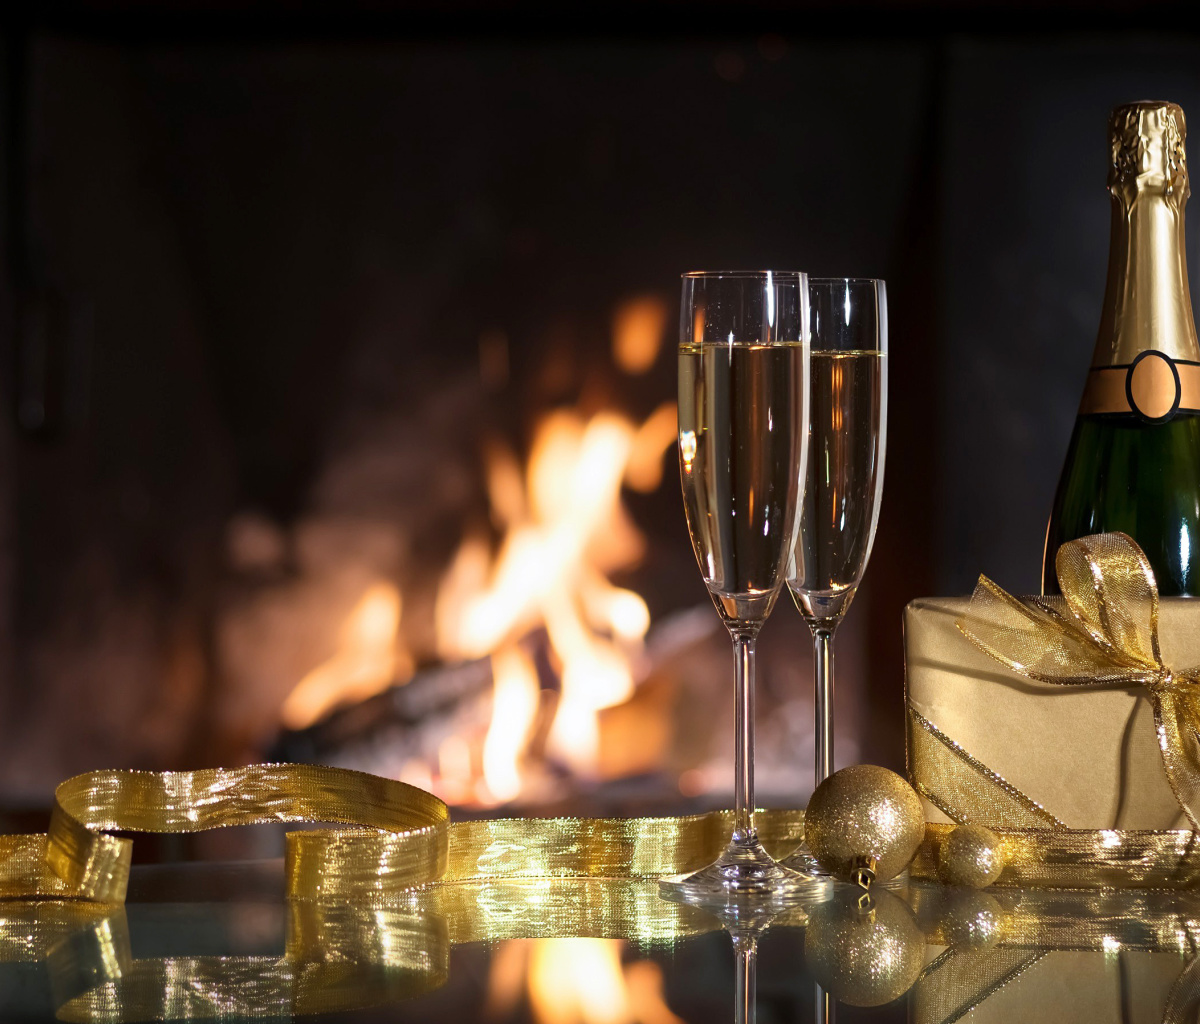 Das Champagne and Fireplace Wallpaper 1200x1024